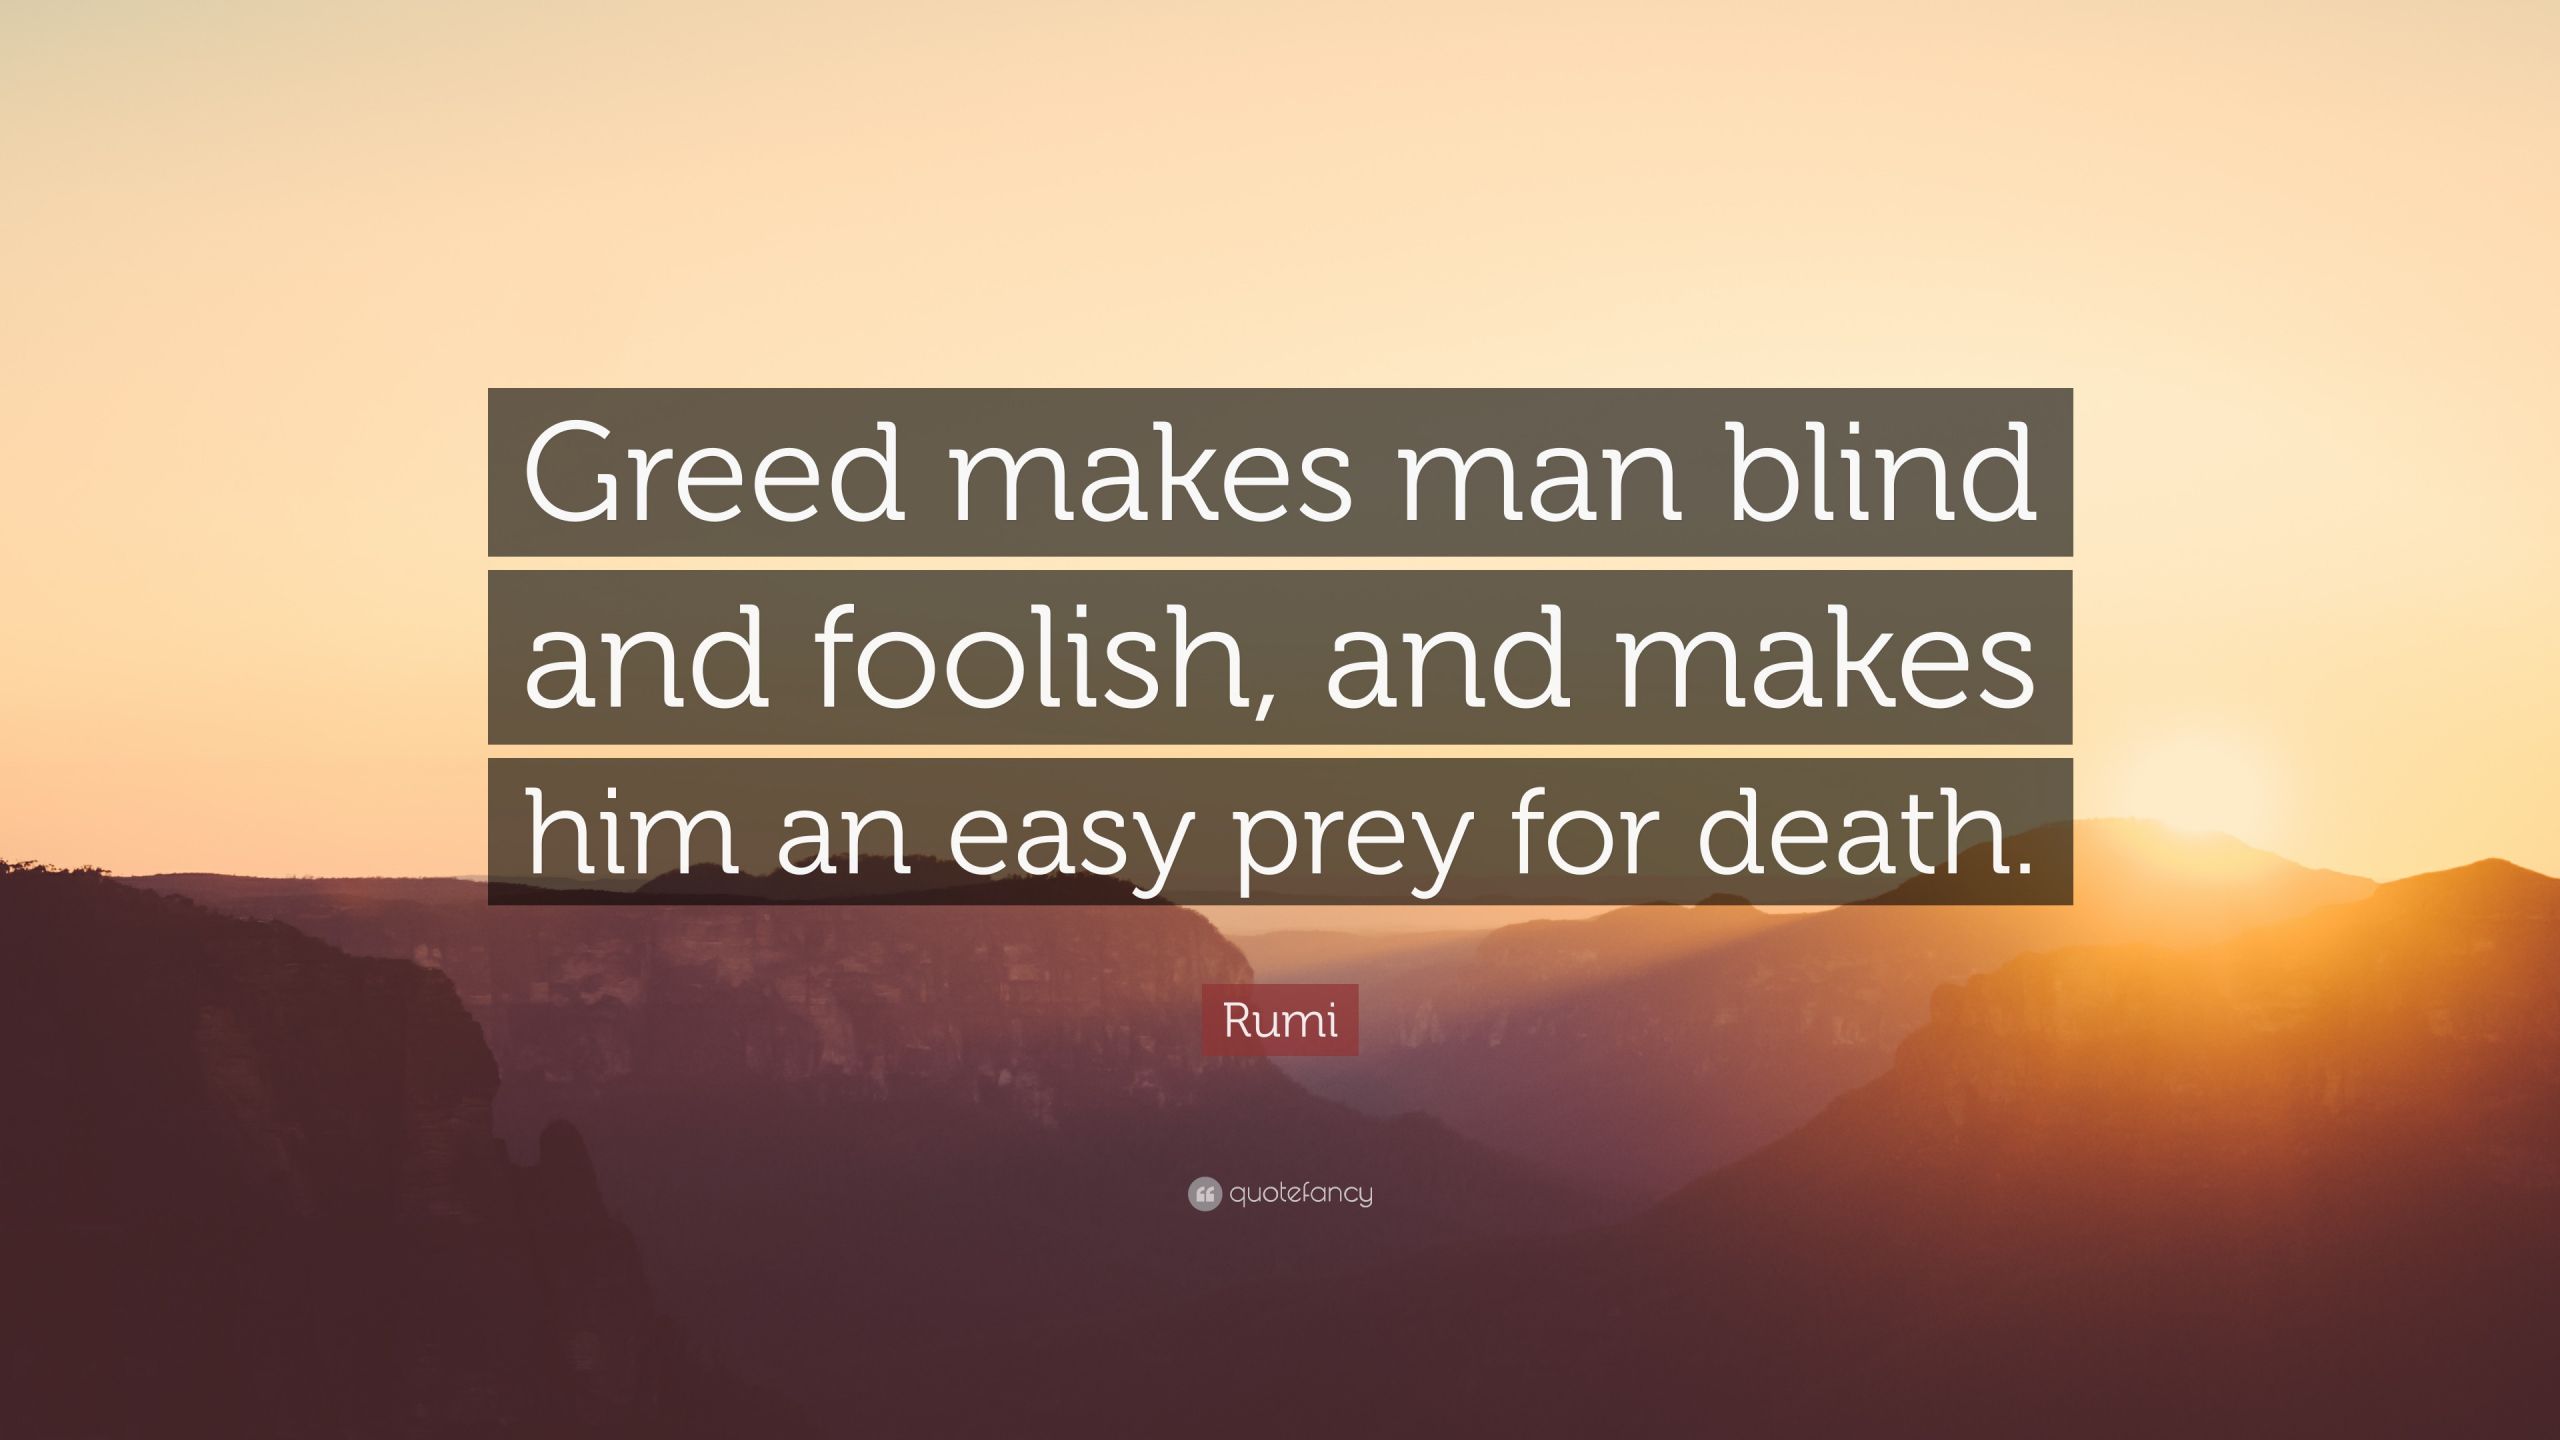 Greedy Family Members After Death Quotes
 Quotes About Greed 40 wallpapers Quotefancy